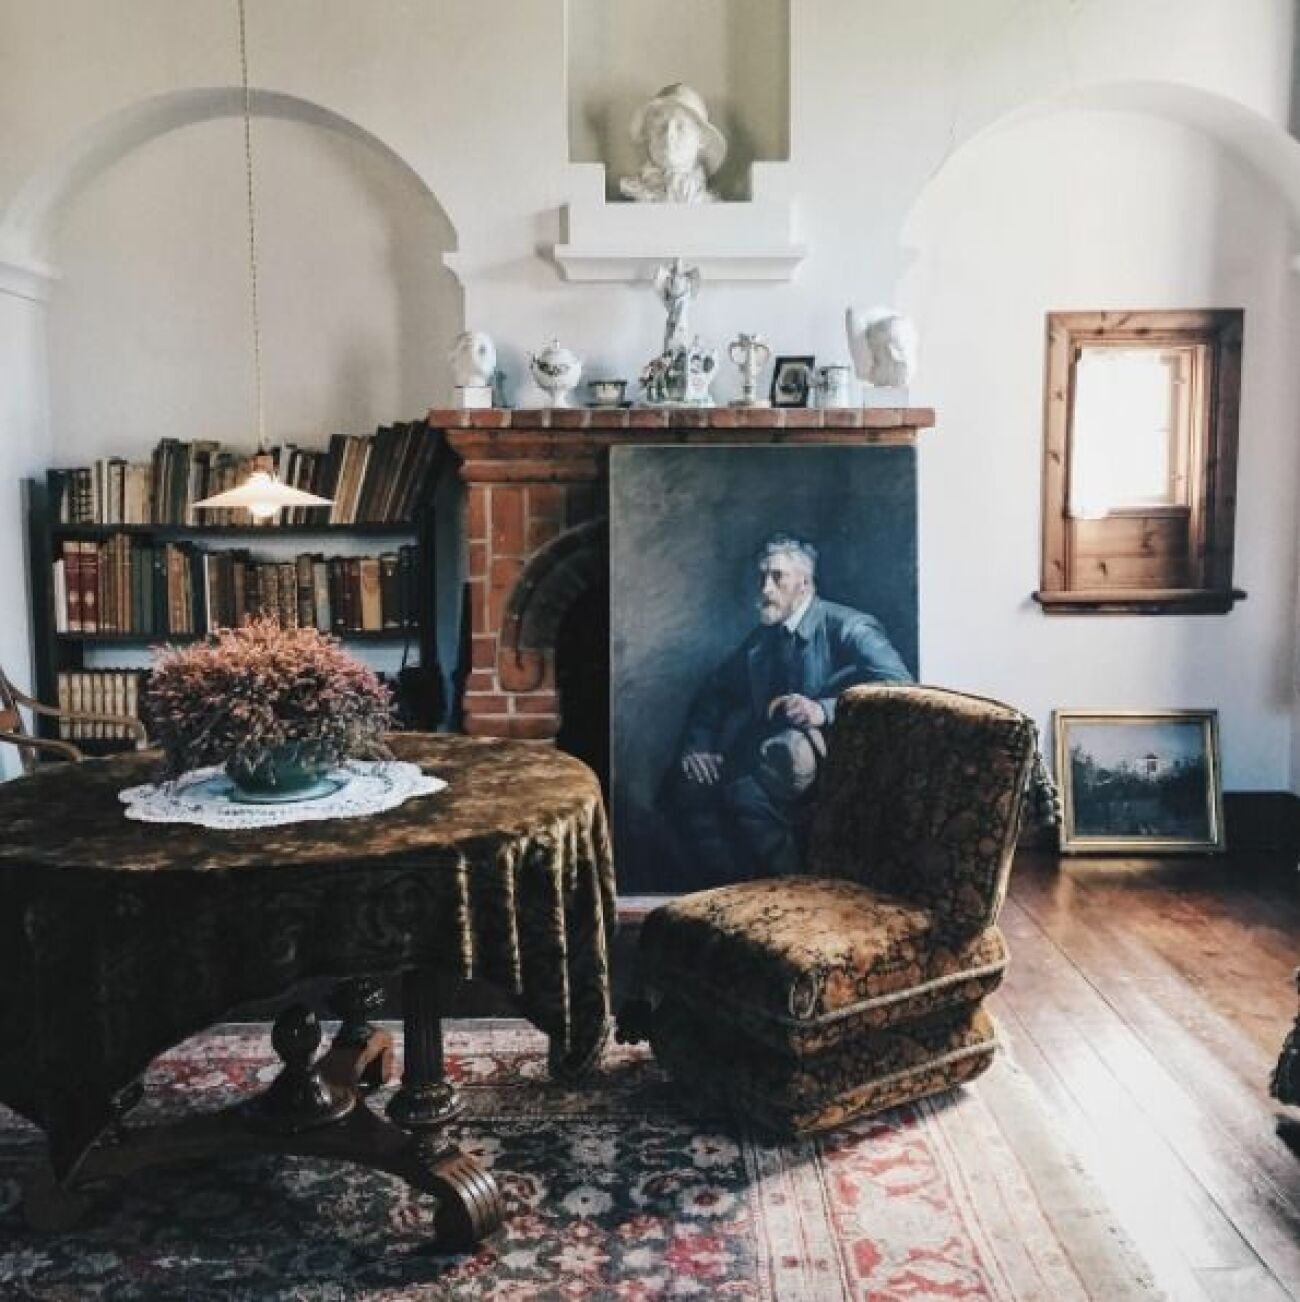 Visiting the house of some our greatest painters, Anna Brøndum and Michael Ancher. The house is full of their paintings and is pretty much untouched since their death in the 30s. Extremely interesting seeing the many great painting, some also painted by their friend P.S. Krøyer.